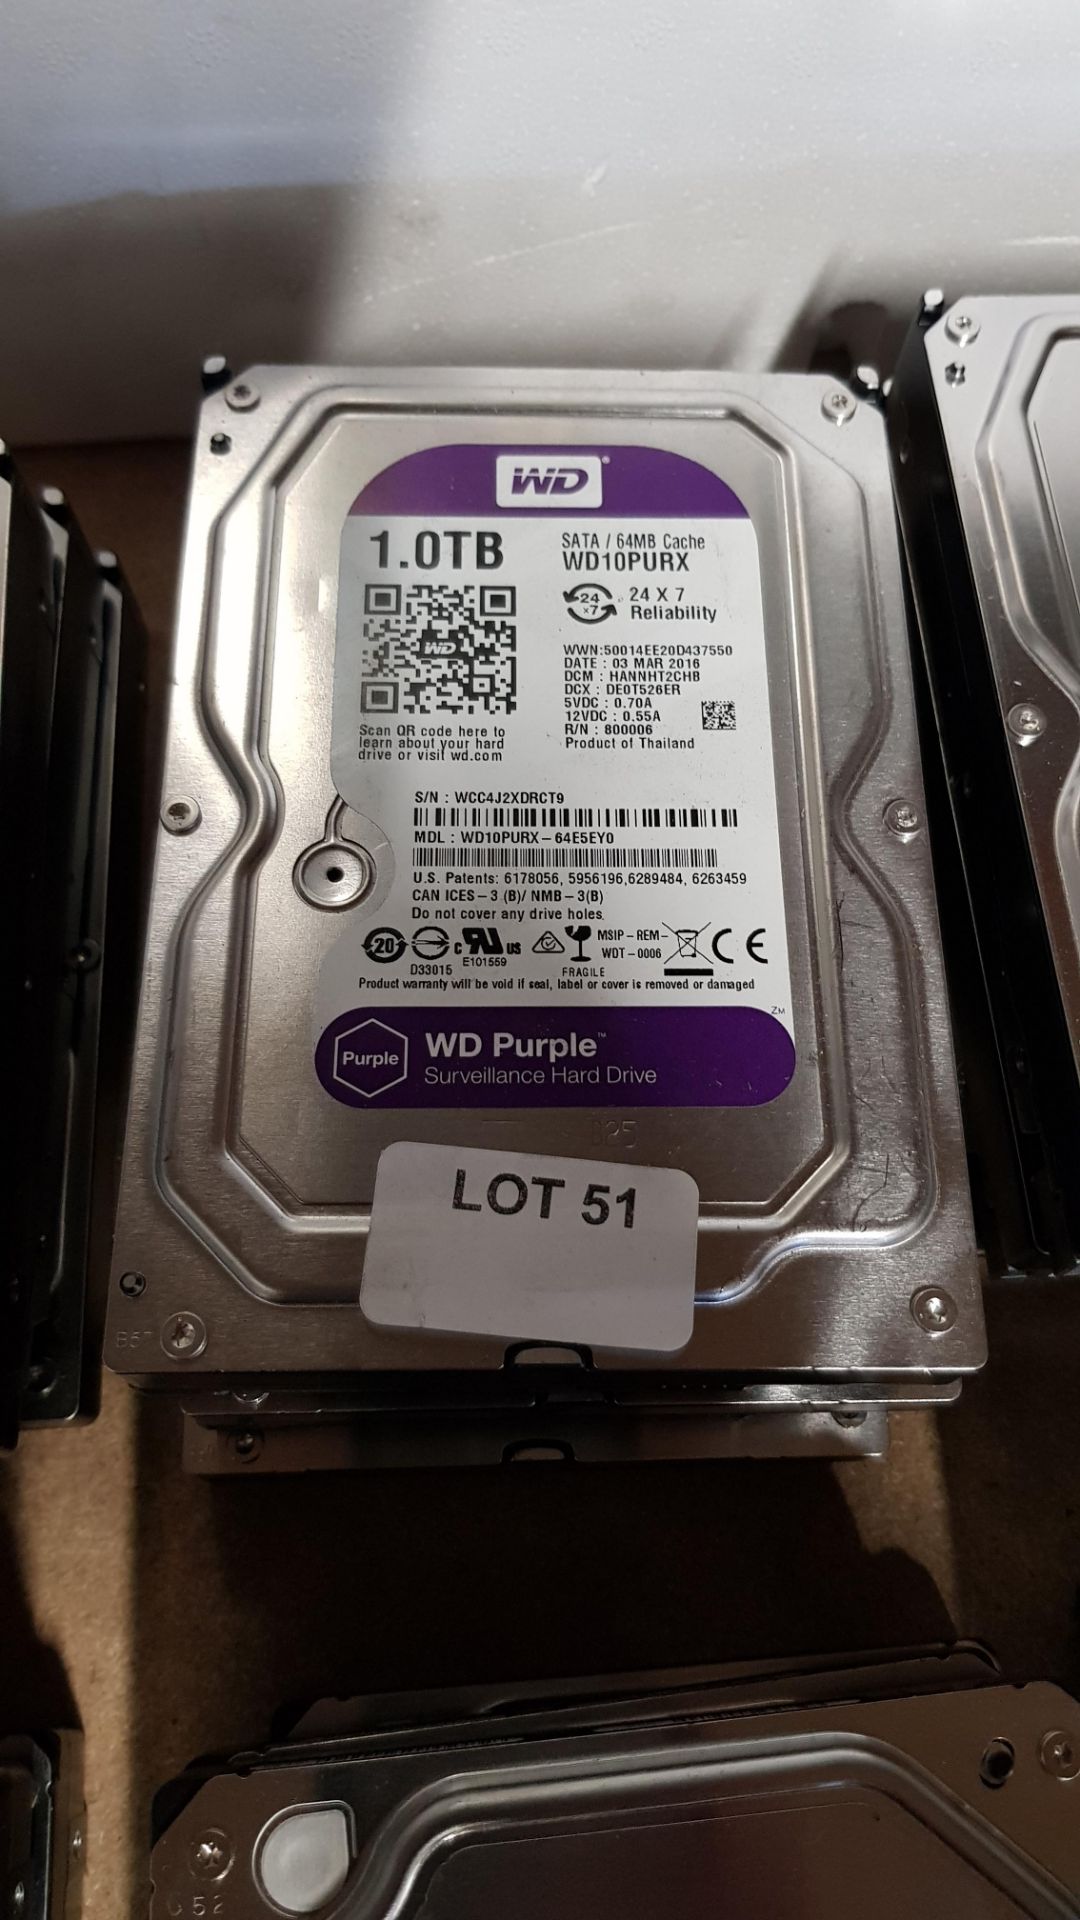 (R13A) 3 X WD Purple 1.0 TB SATA 64MB Cache Hard Drive (WD10PURX) – All Units Have Been Formatted